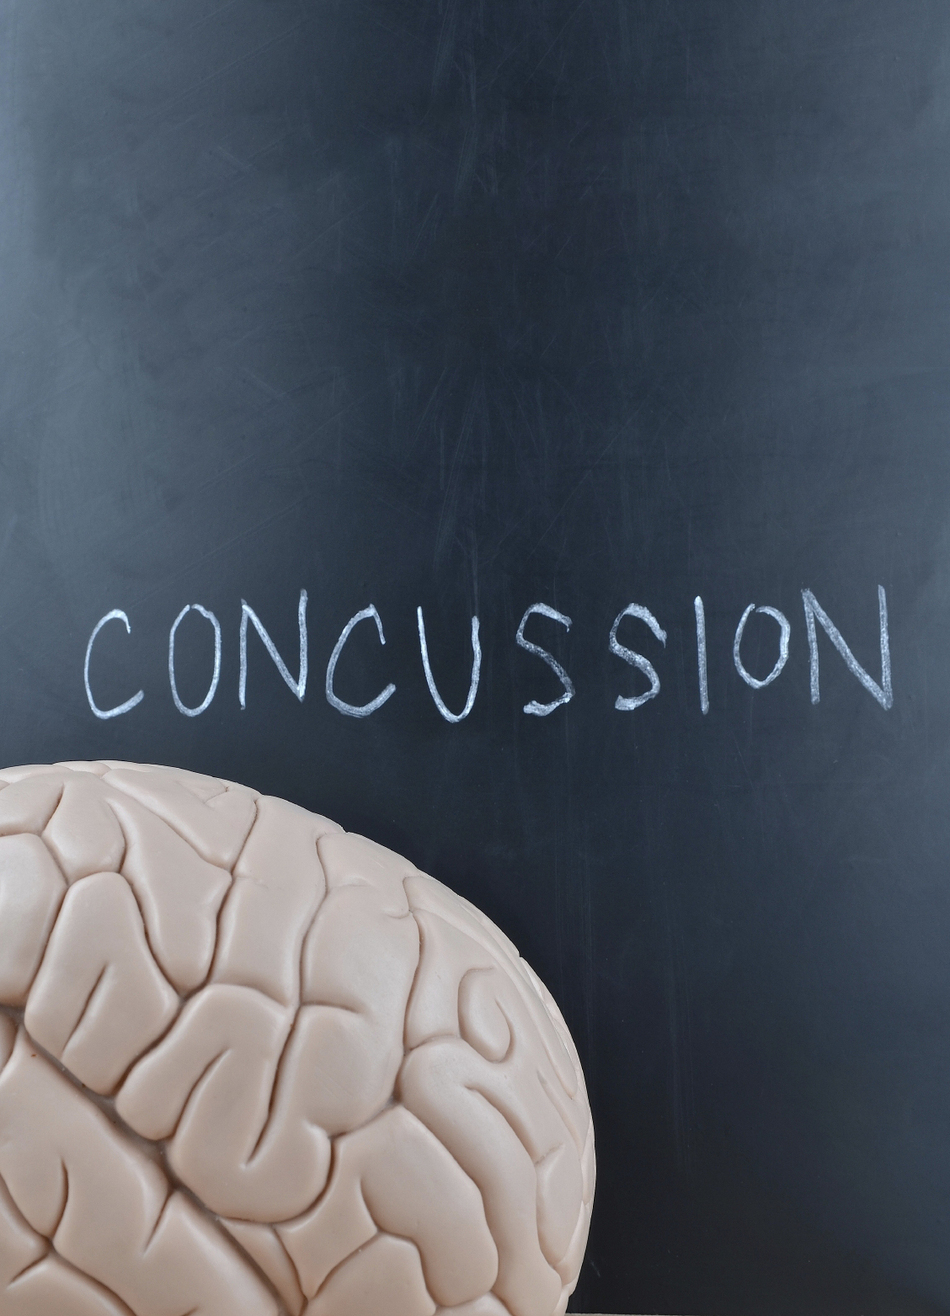 A Doctor’s Take on the Condition in the Will Smith Movie “Concussion”